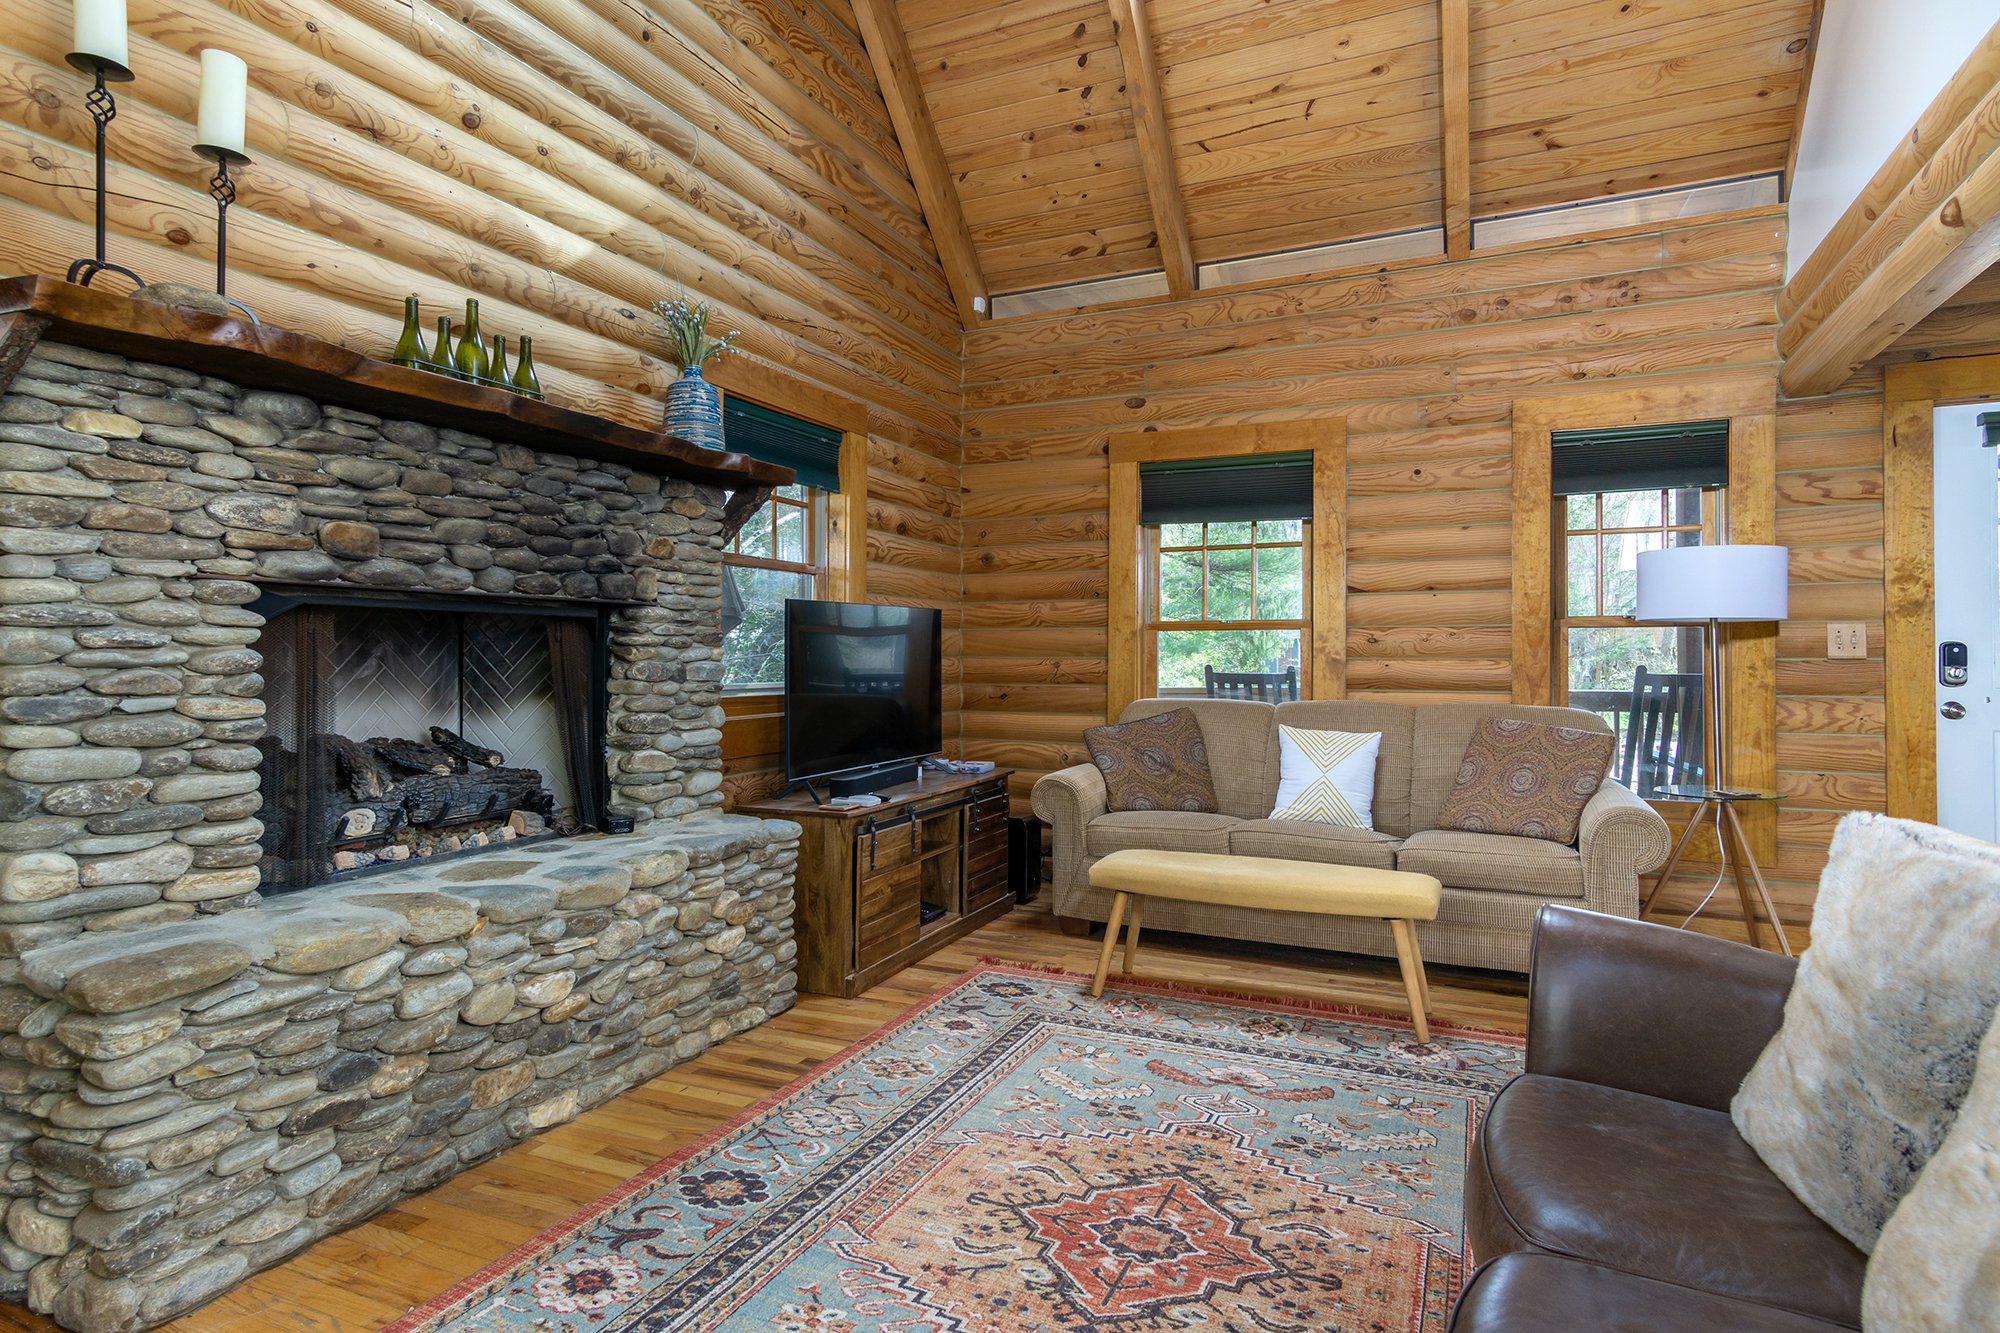 Gather in the cozy living room around the gas logs fireplace while streaming your favorite shows & movies on the 50" smart TV.